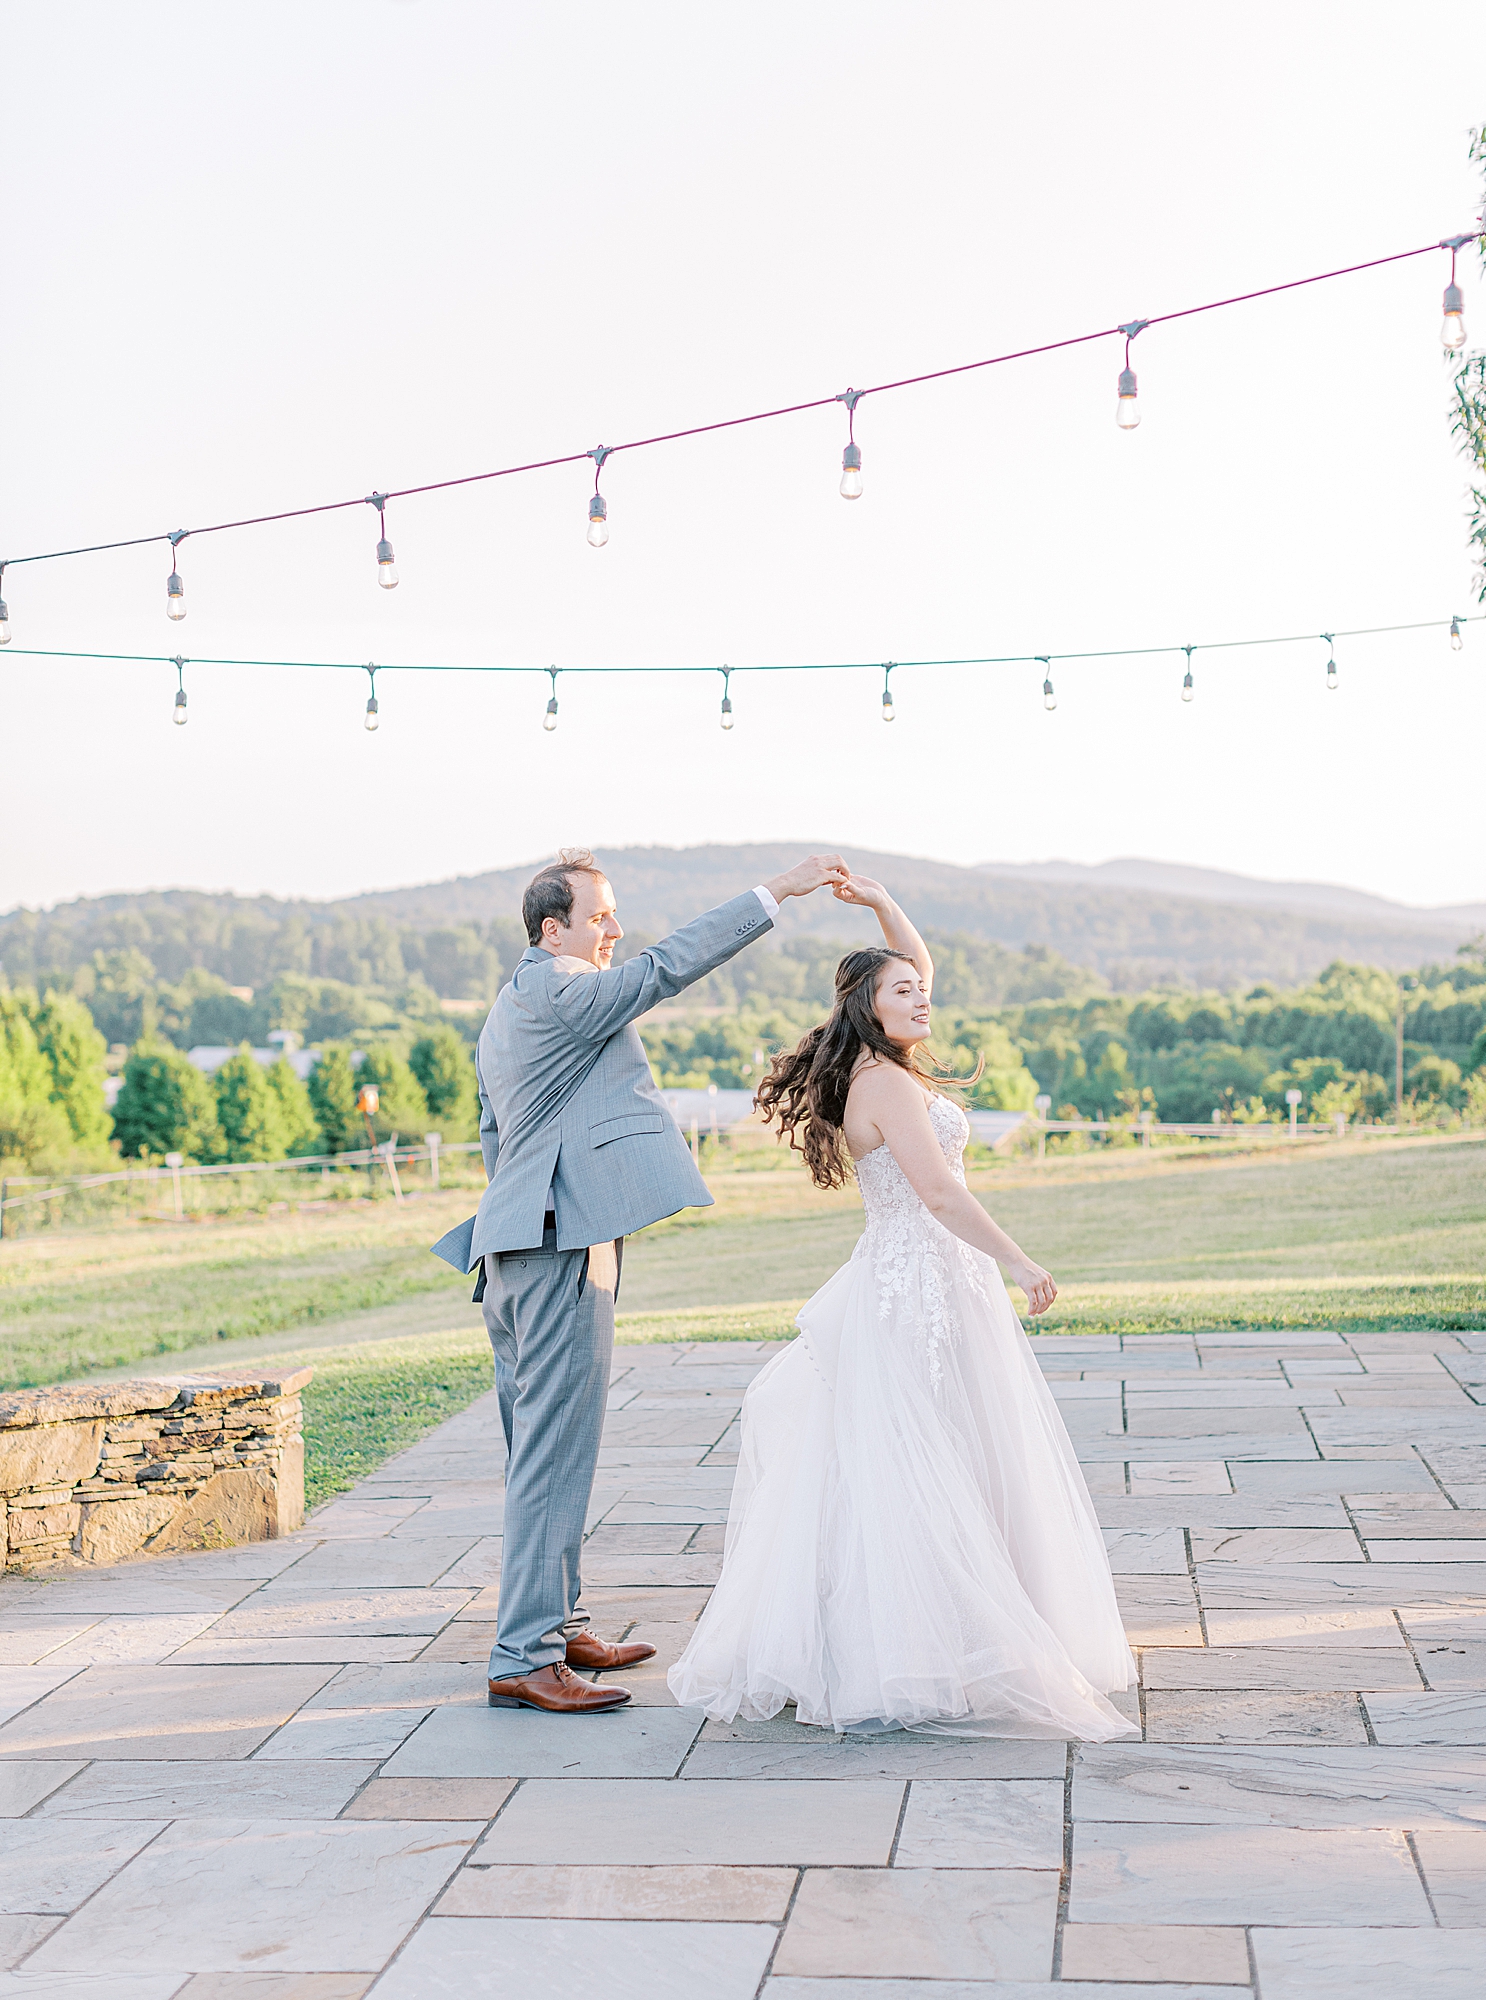 Groom twirling bride for portraits by Ashley Eagleson Photography.